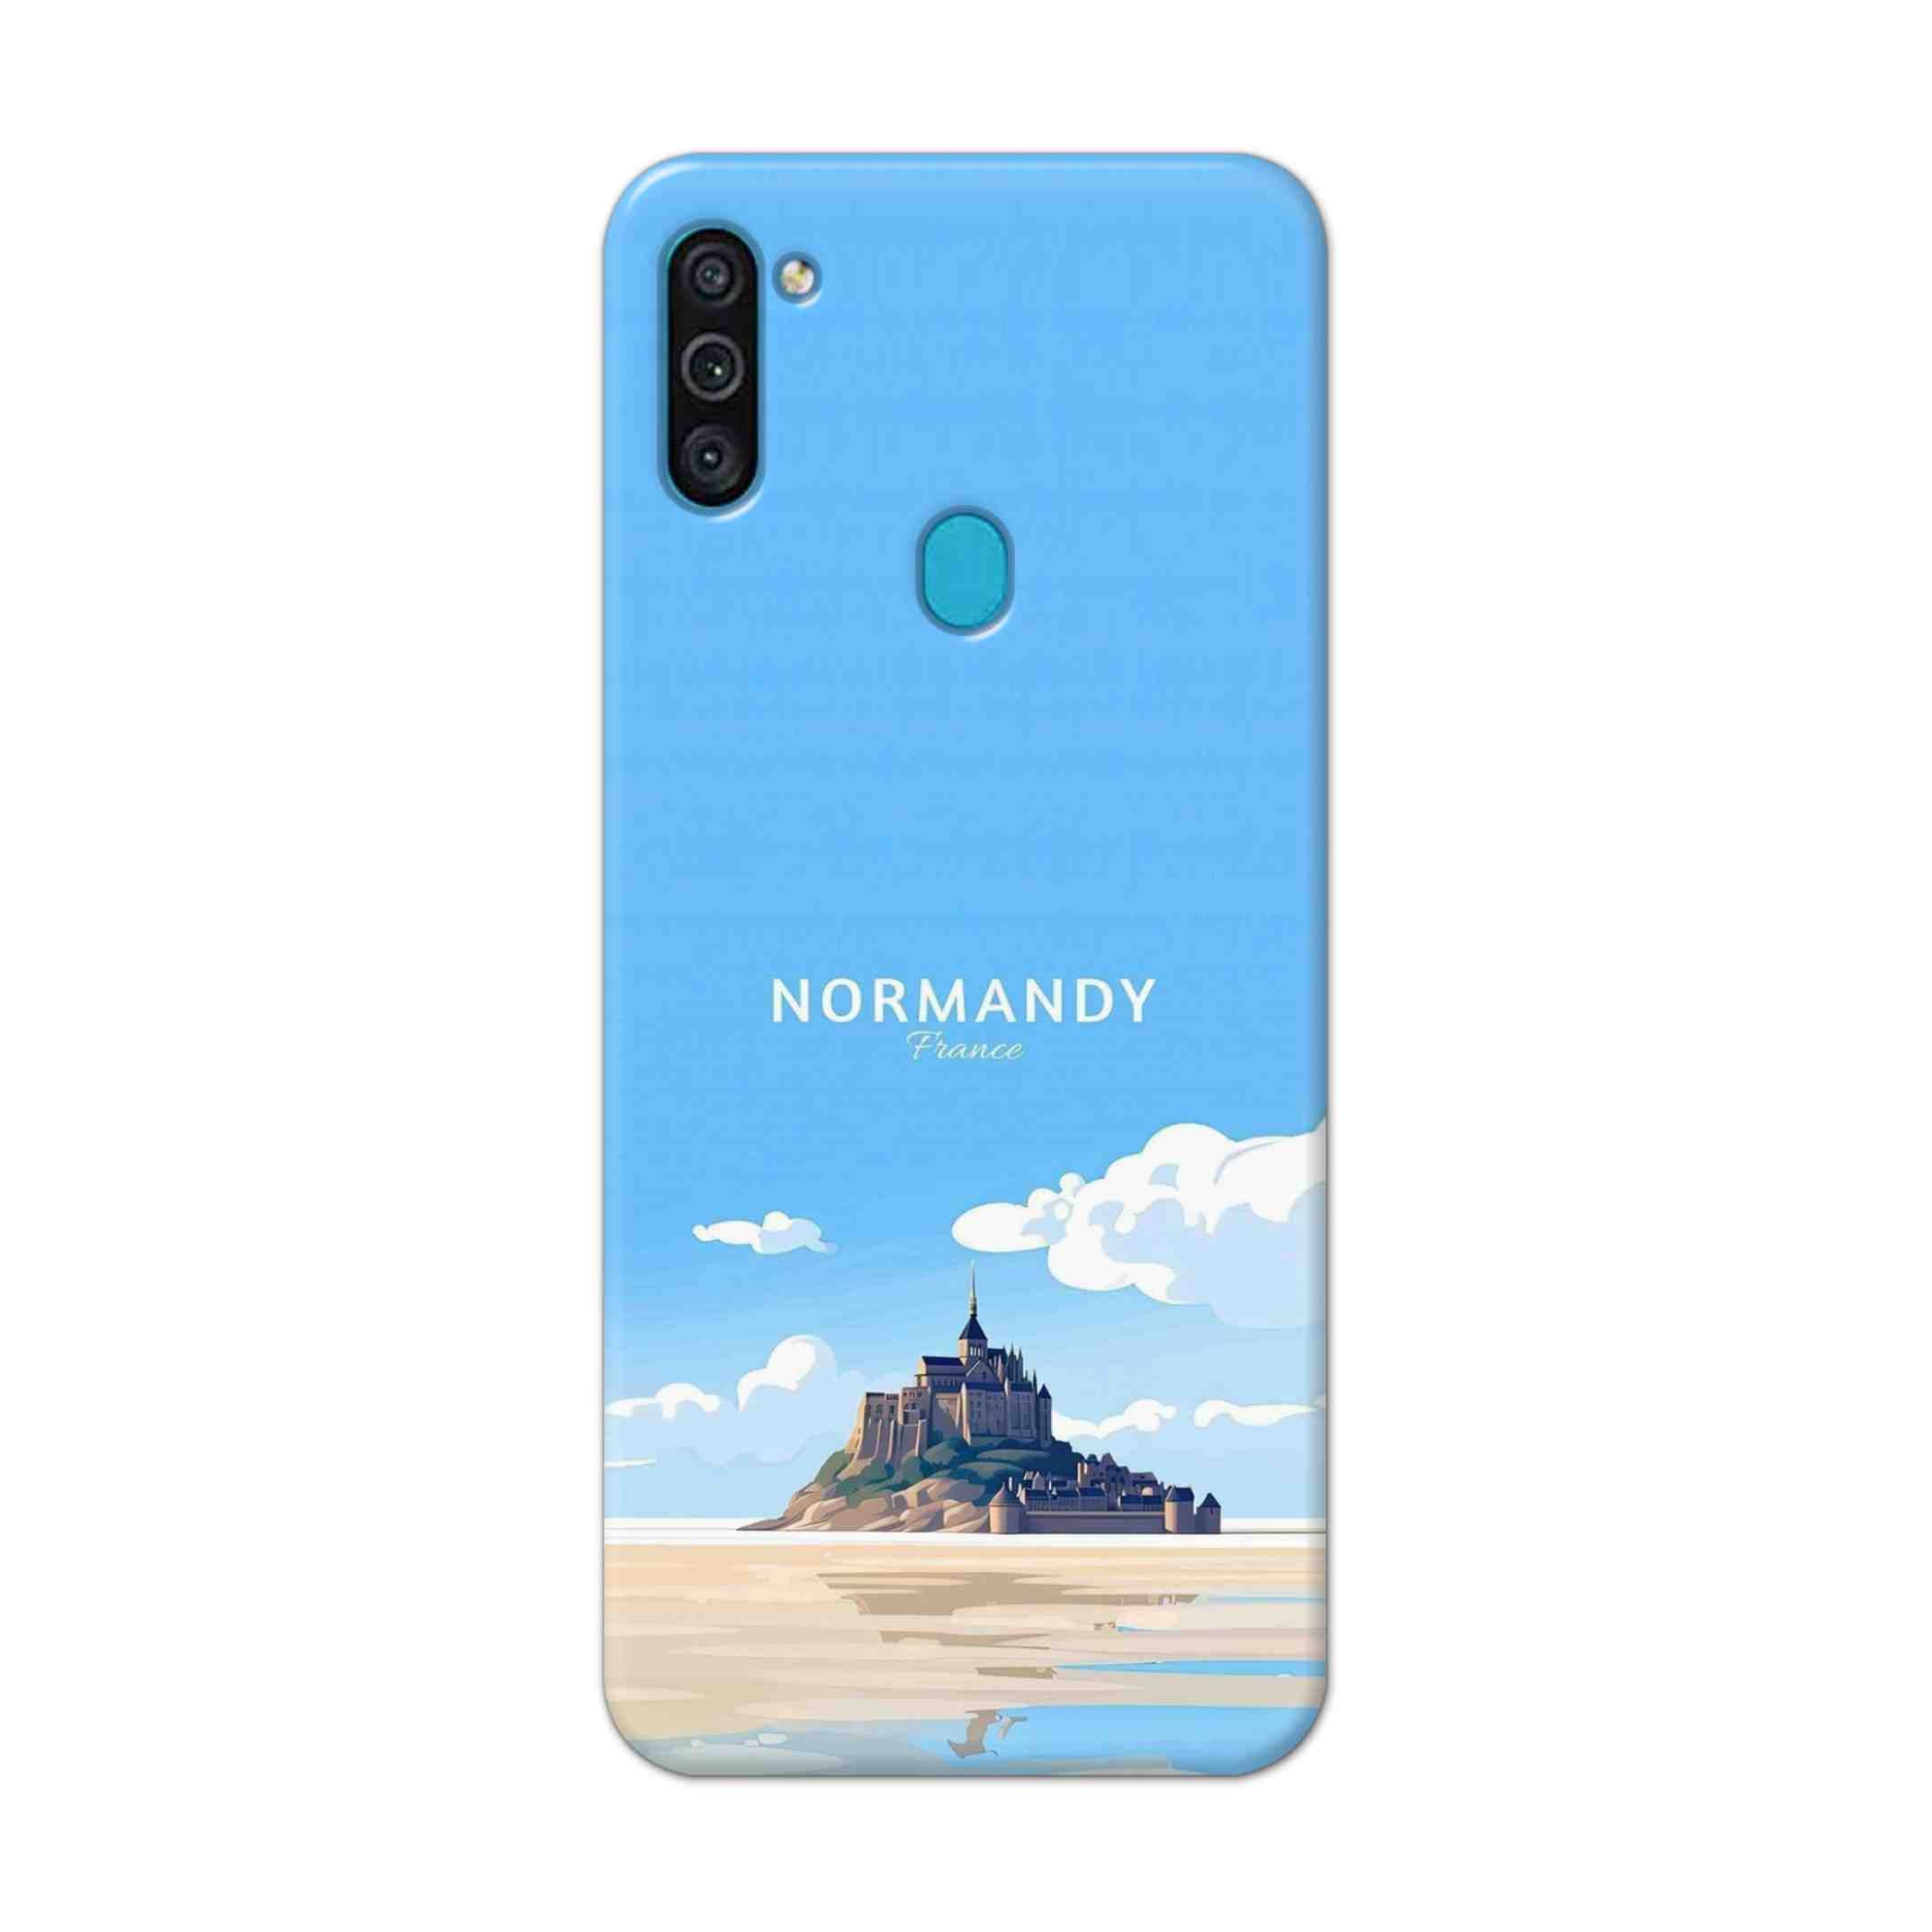 Buy Normandy Hard Back Mobile Phone Case Cover For Samsung Galaxy M11 Online